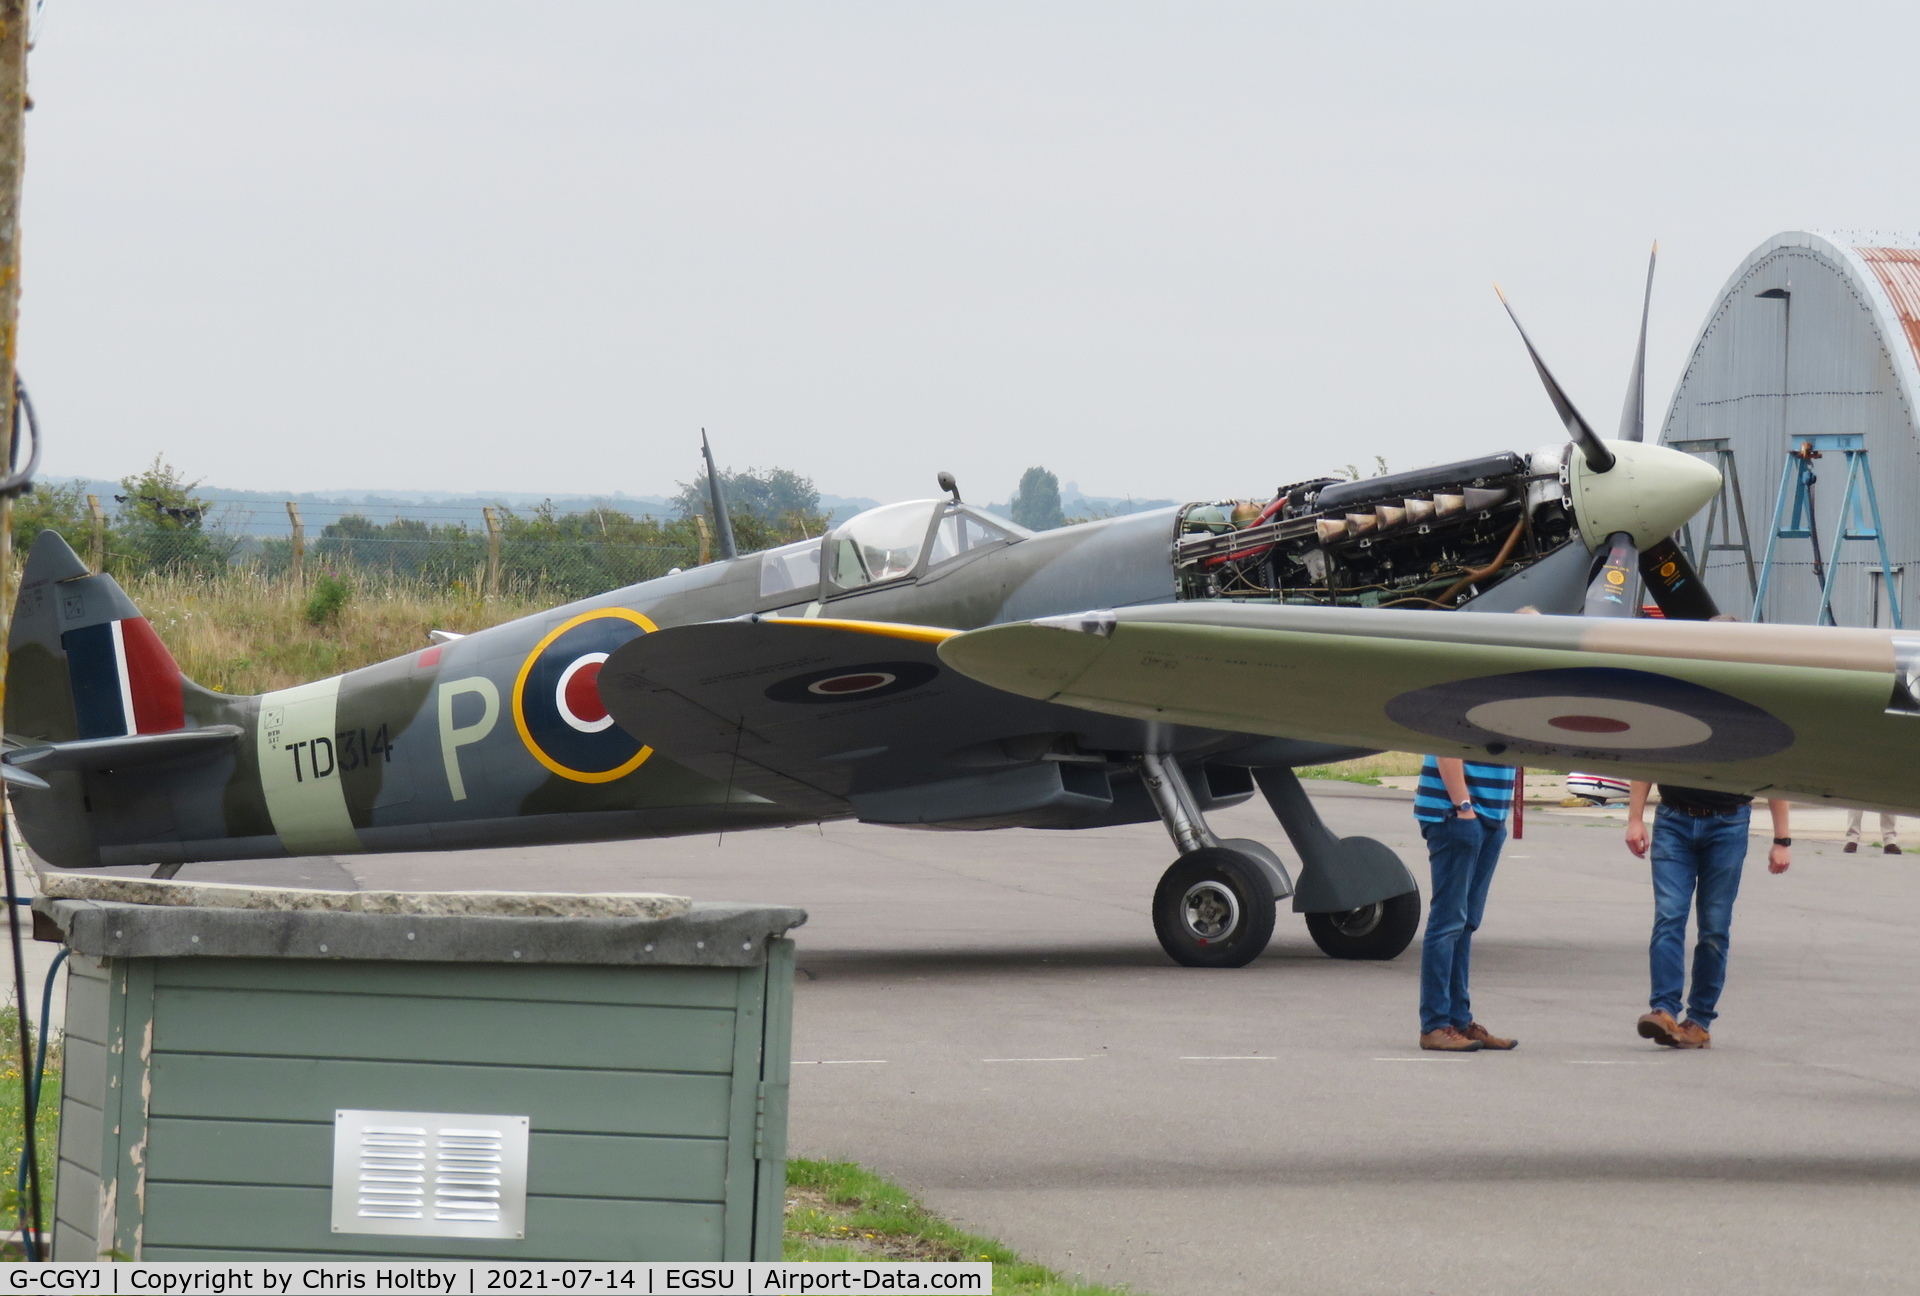 G-CGYJ, 1944 Supermarine Spitfire HFIX  (Mark IXe) C/N CBAF 10492, Briefly rolled out at Duxford whilst undergoing maintenance work